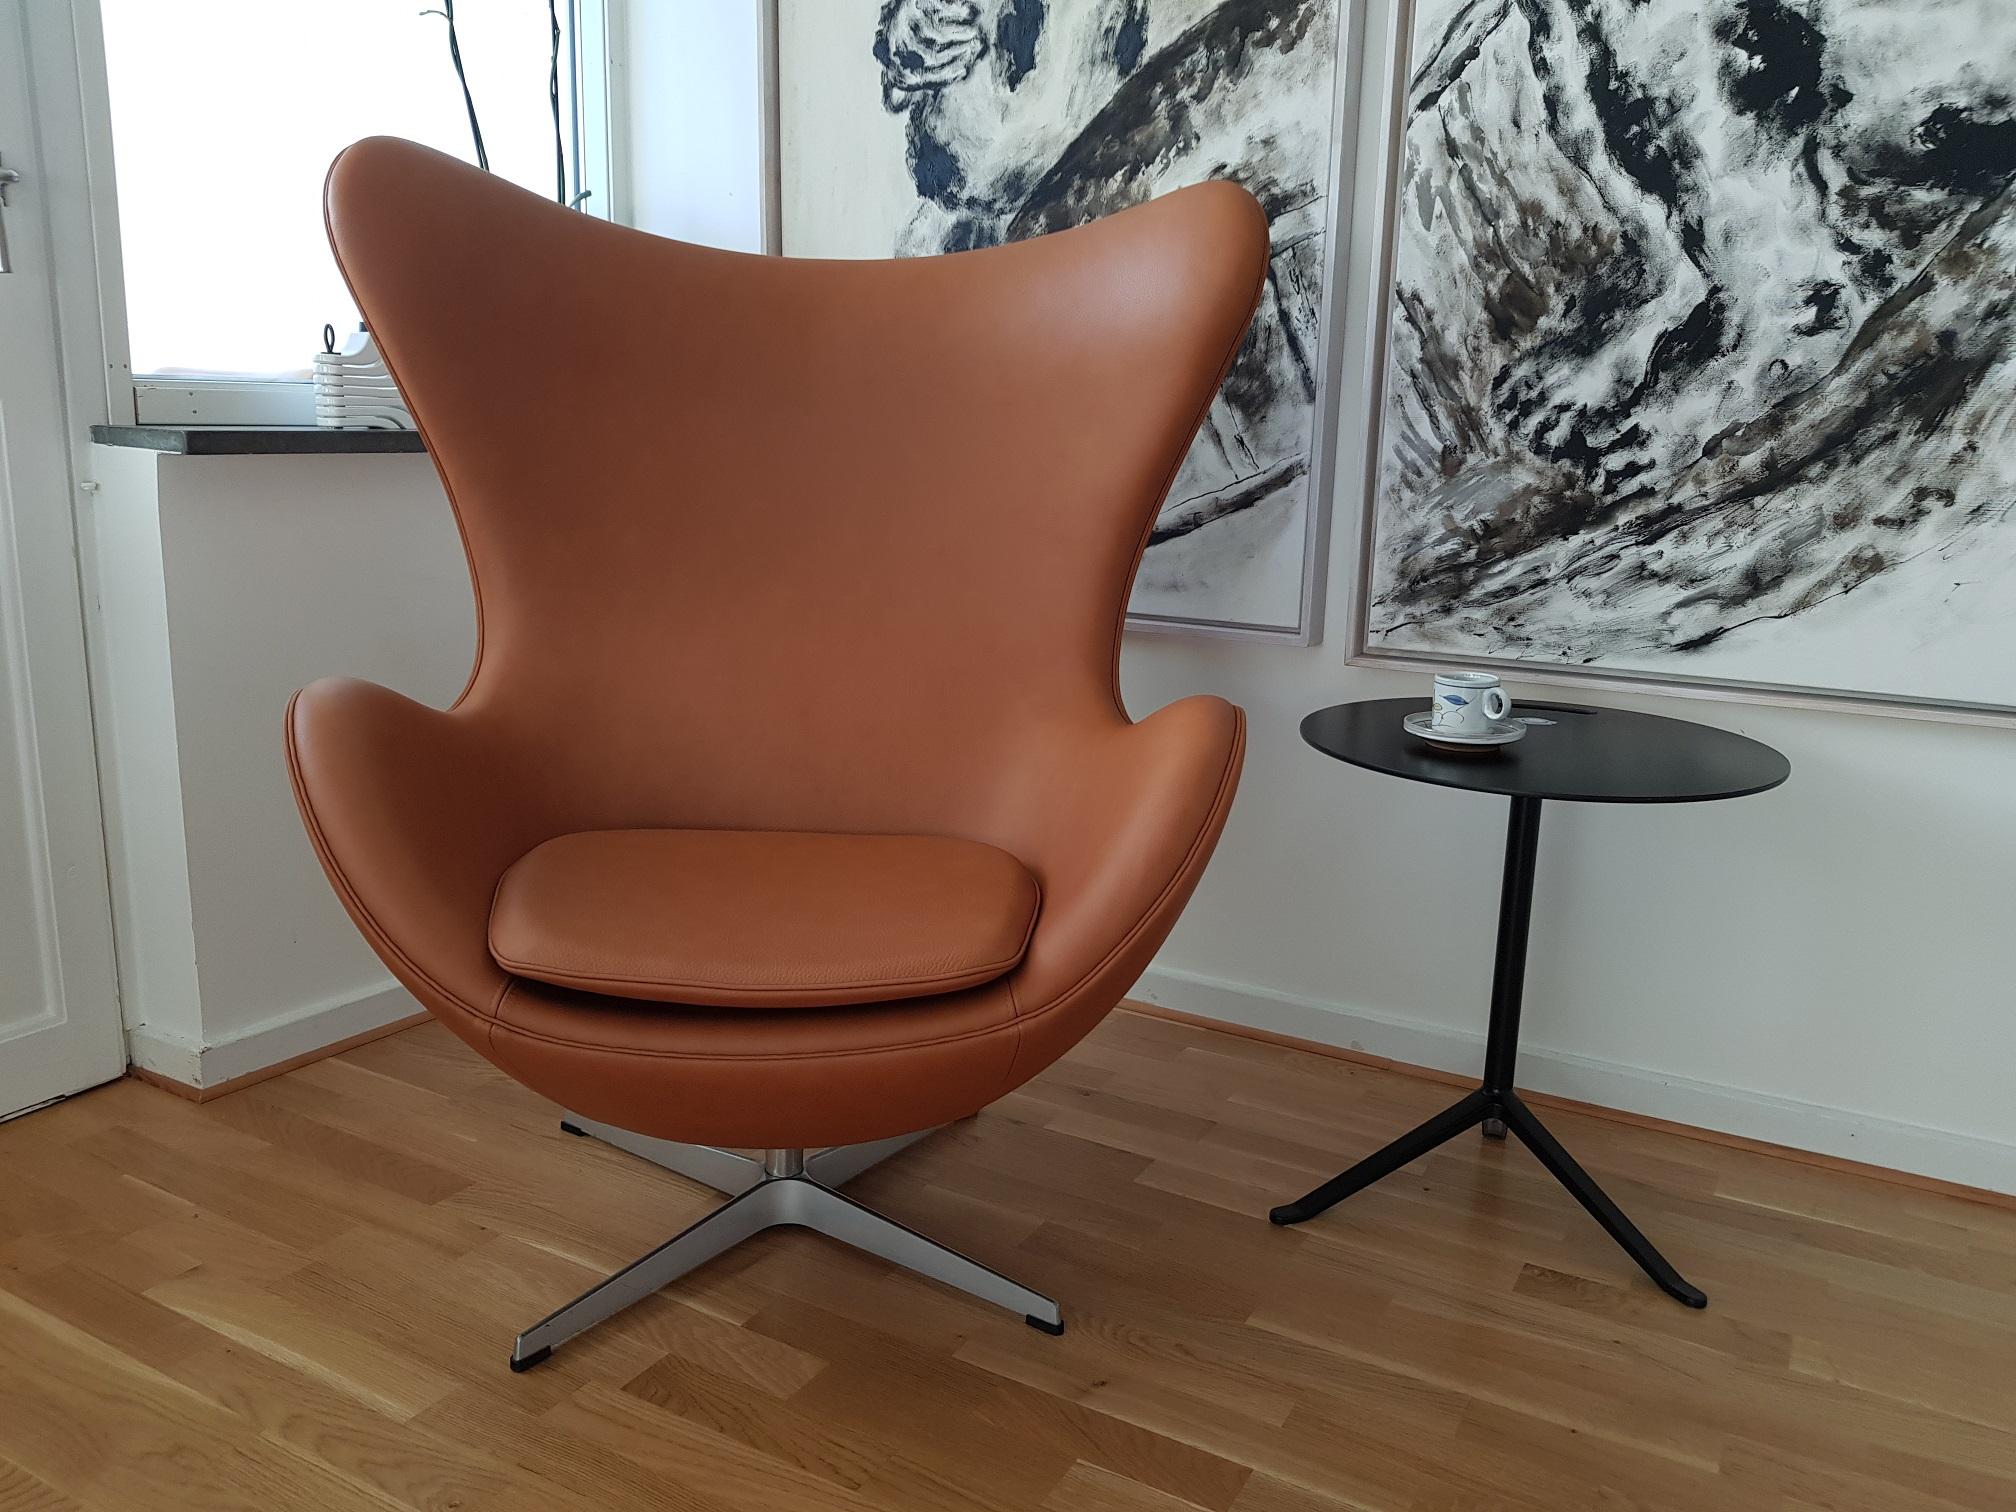 The Egg chair, newly upholstered in calvados classic leather. The tilt mechanism makes the chair adjustable and more comfortable. Produced in 2003 and upholstered in Denmark in 2018 with semi-aniline leather. This iconic chair is one of the most